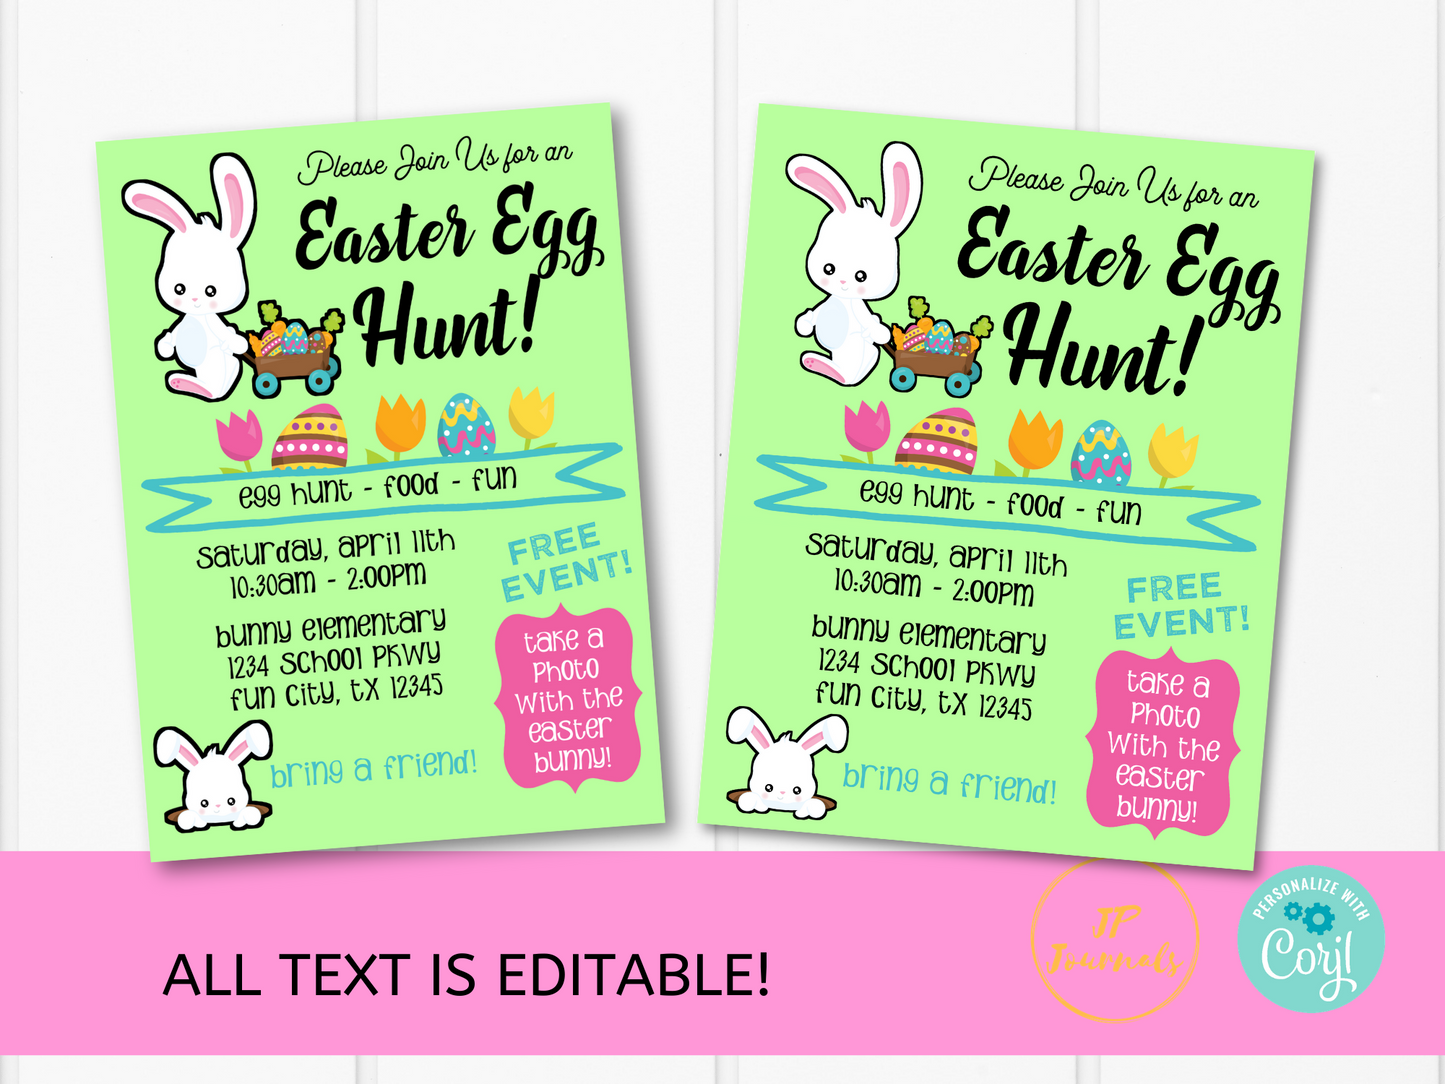 Easter Egg Hunt Invitation Template - Printable Invite and Flyer - Edit and Print DIY - Church HOA School Office Community Events